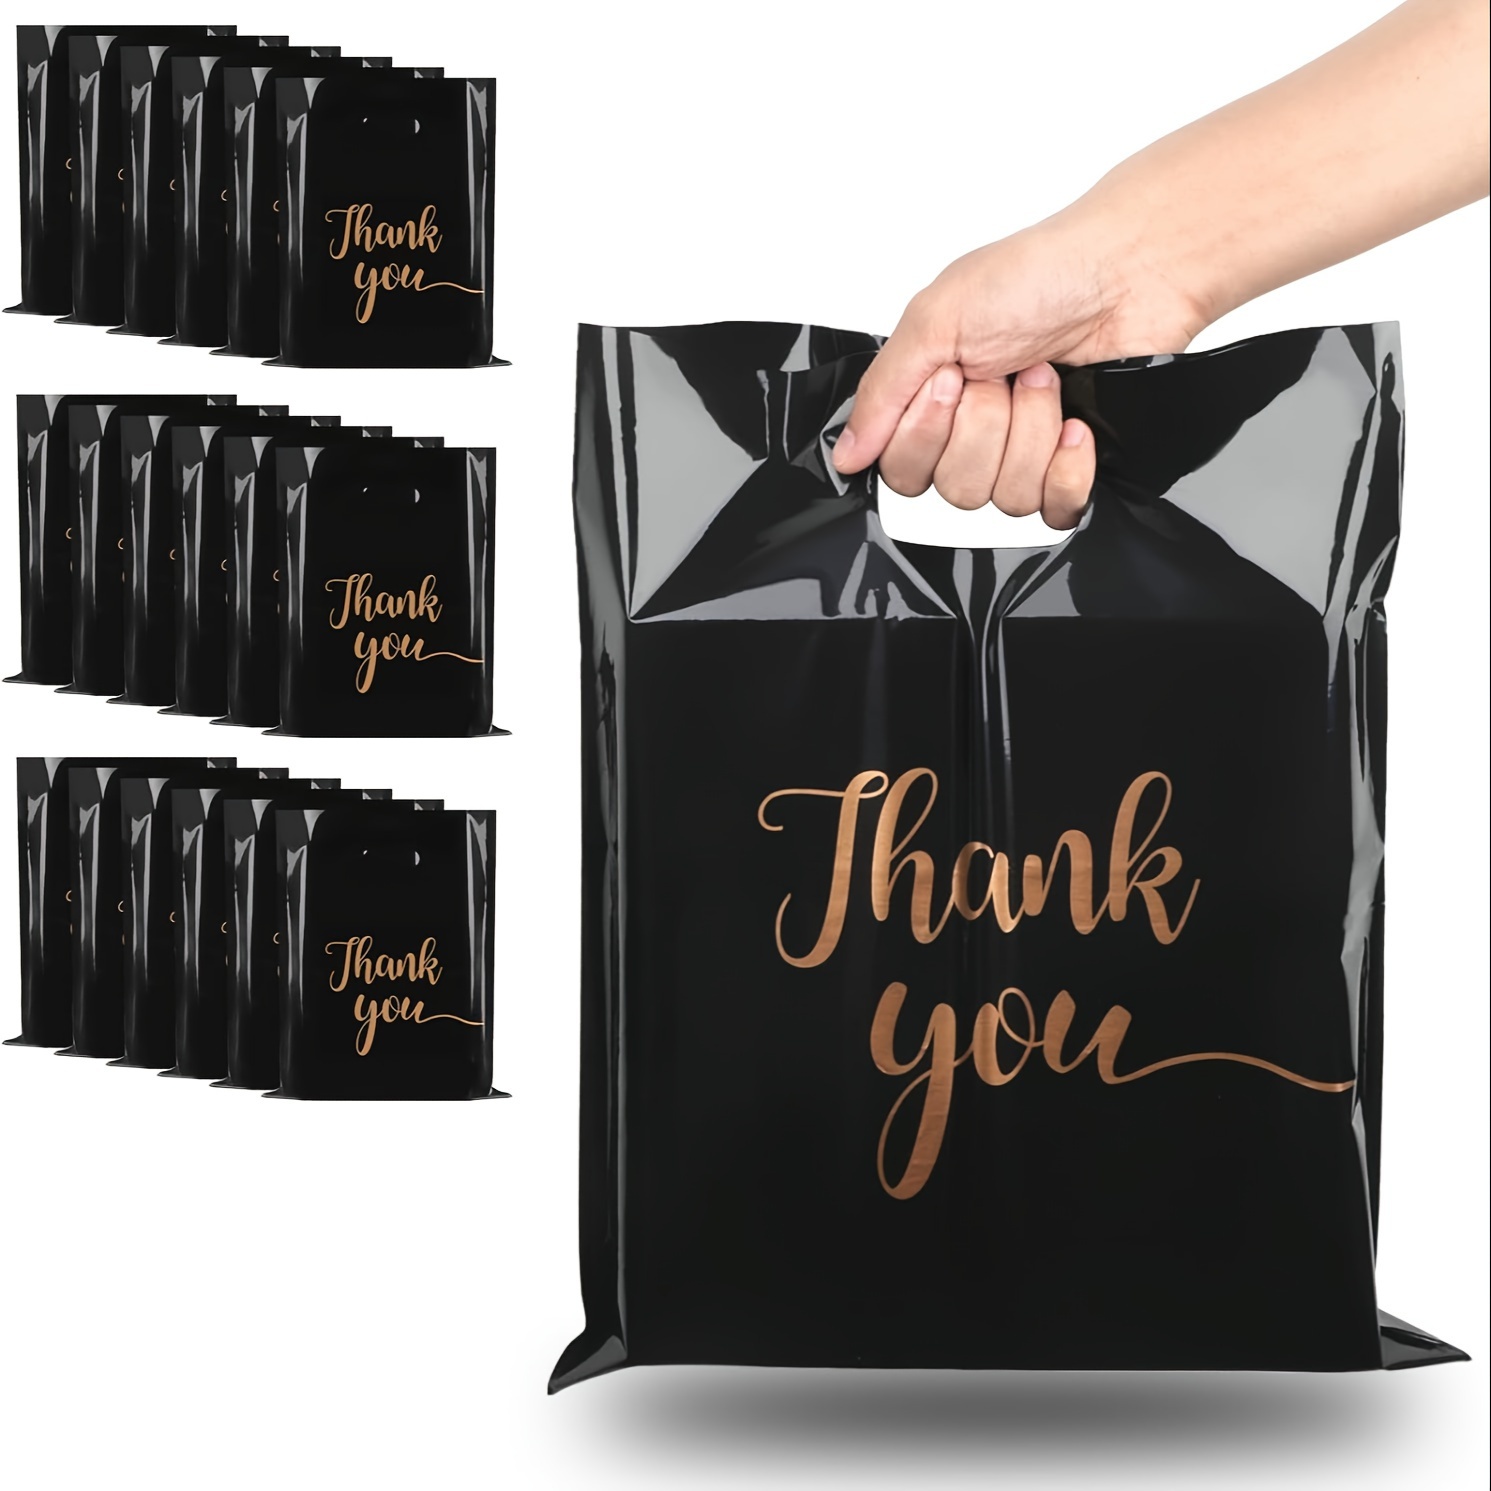 

20pcs Thank You Merchandise Bags Retail Plastic Shopping Bags For Small Business Stores, 12 X 15 Inch Reusable Black Thank You Bags With Handles For Boutiques, Gifts